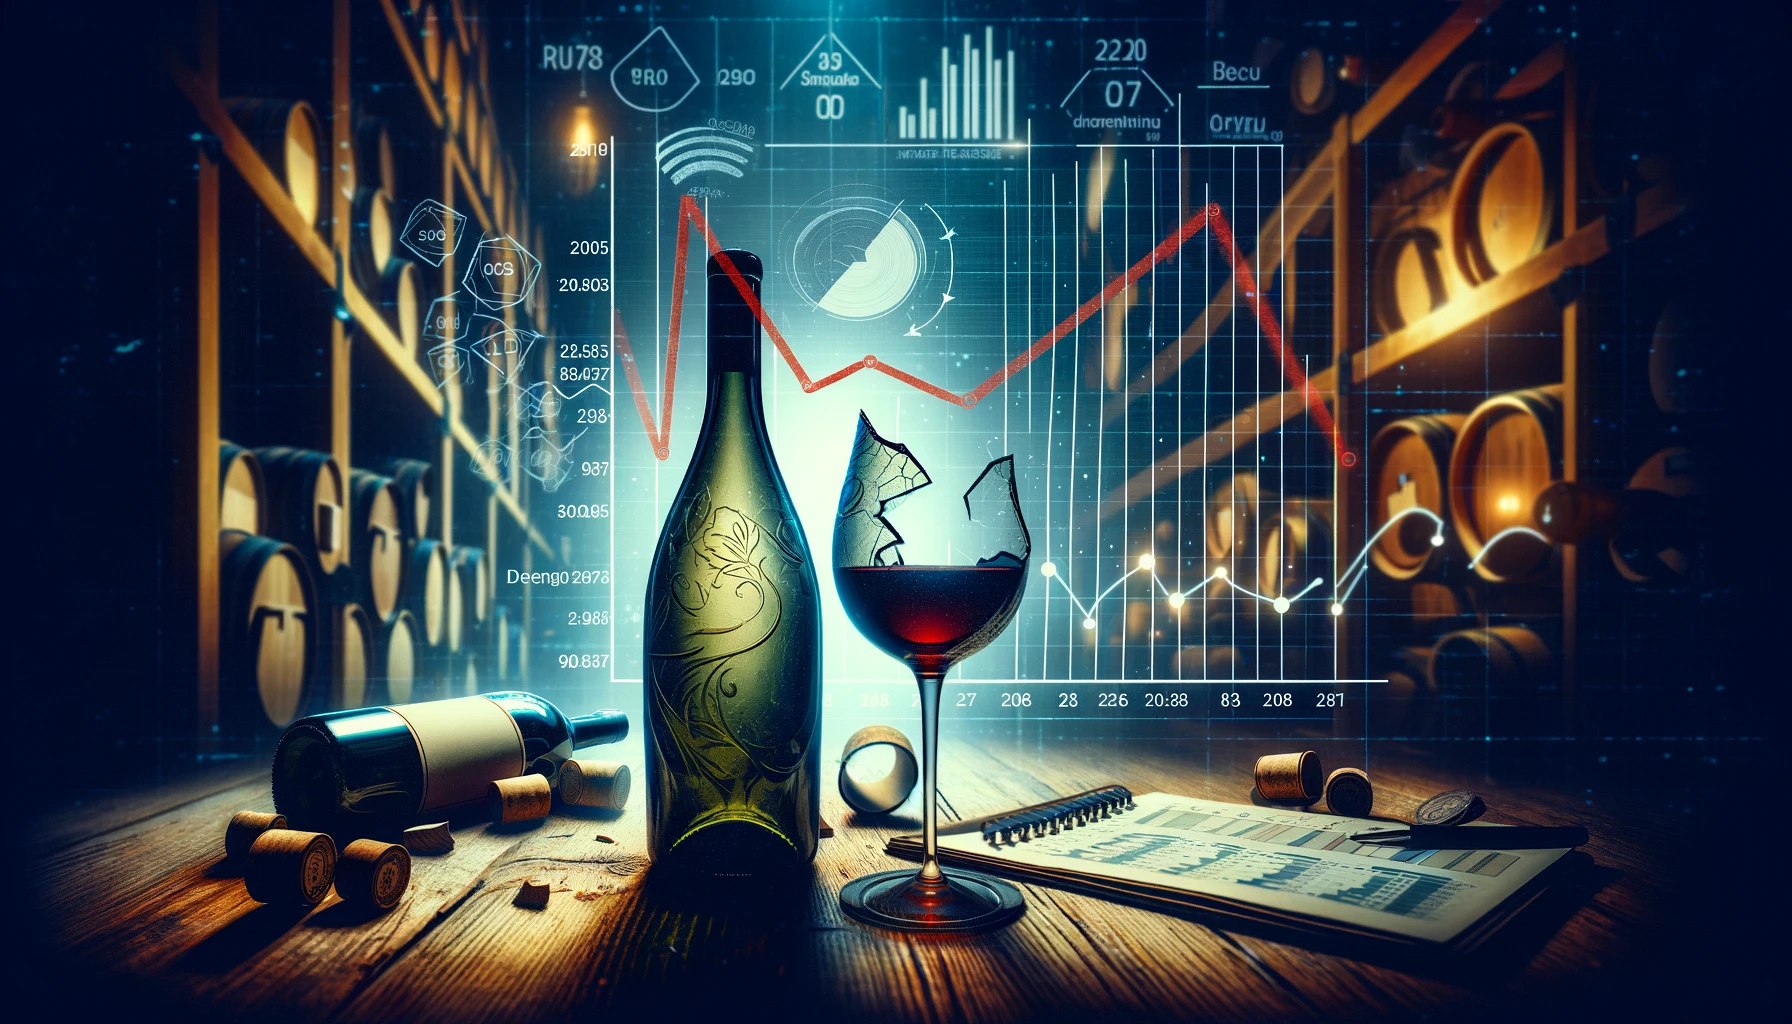 Common Mistakes to Avoid in Wine Investing